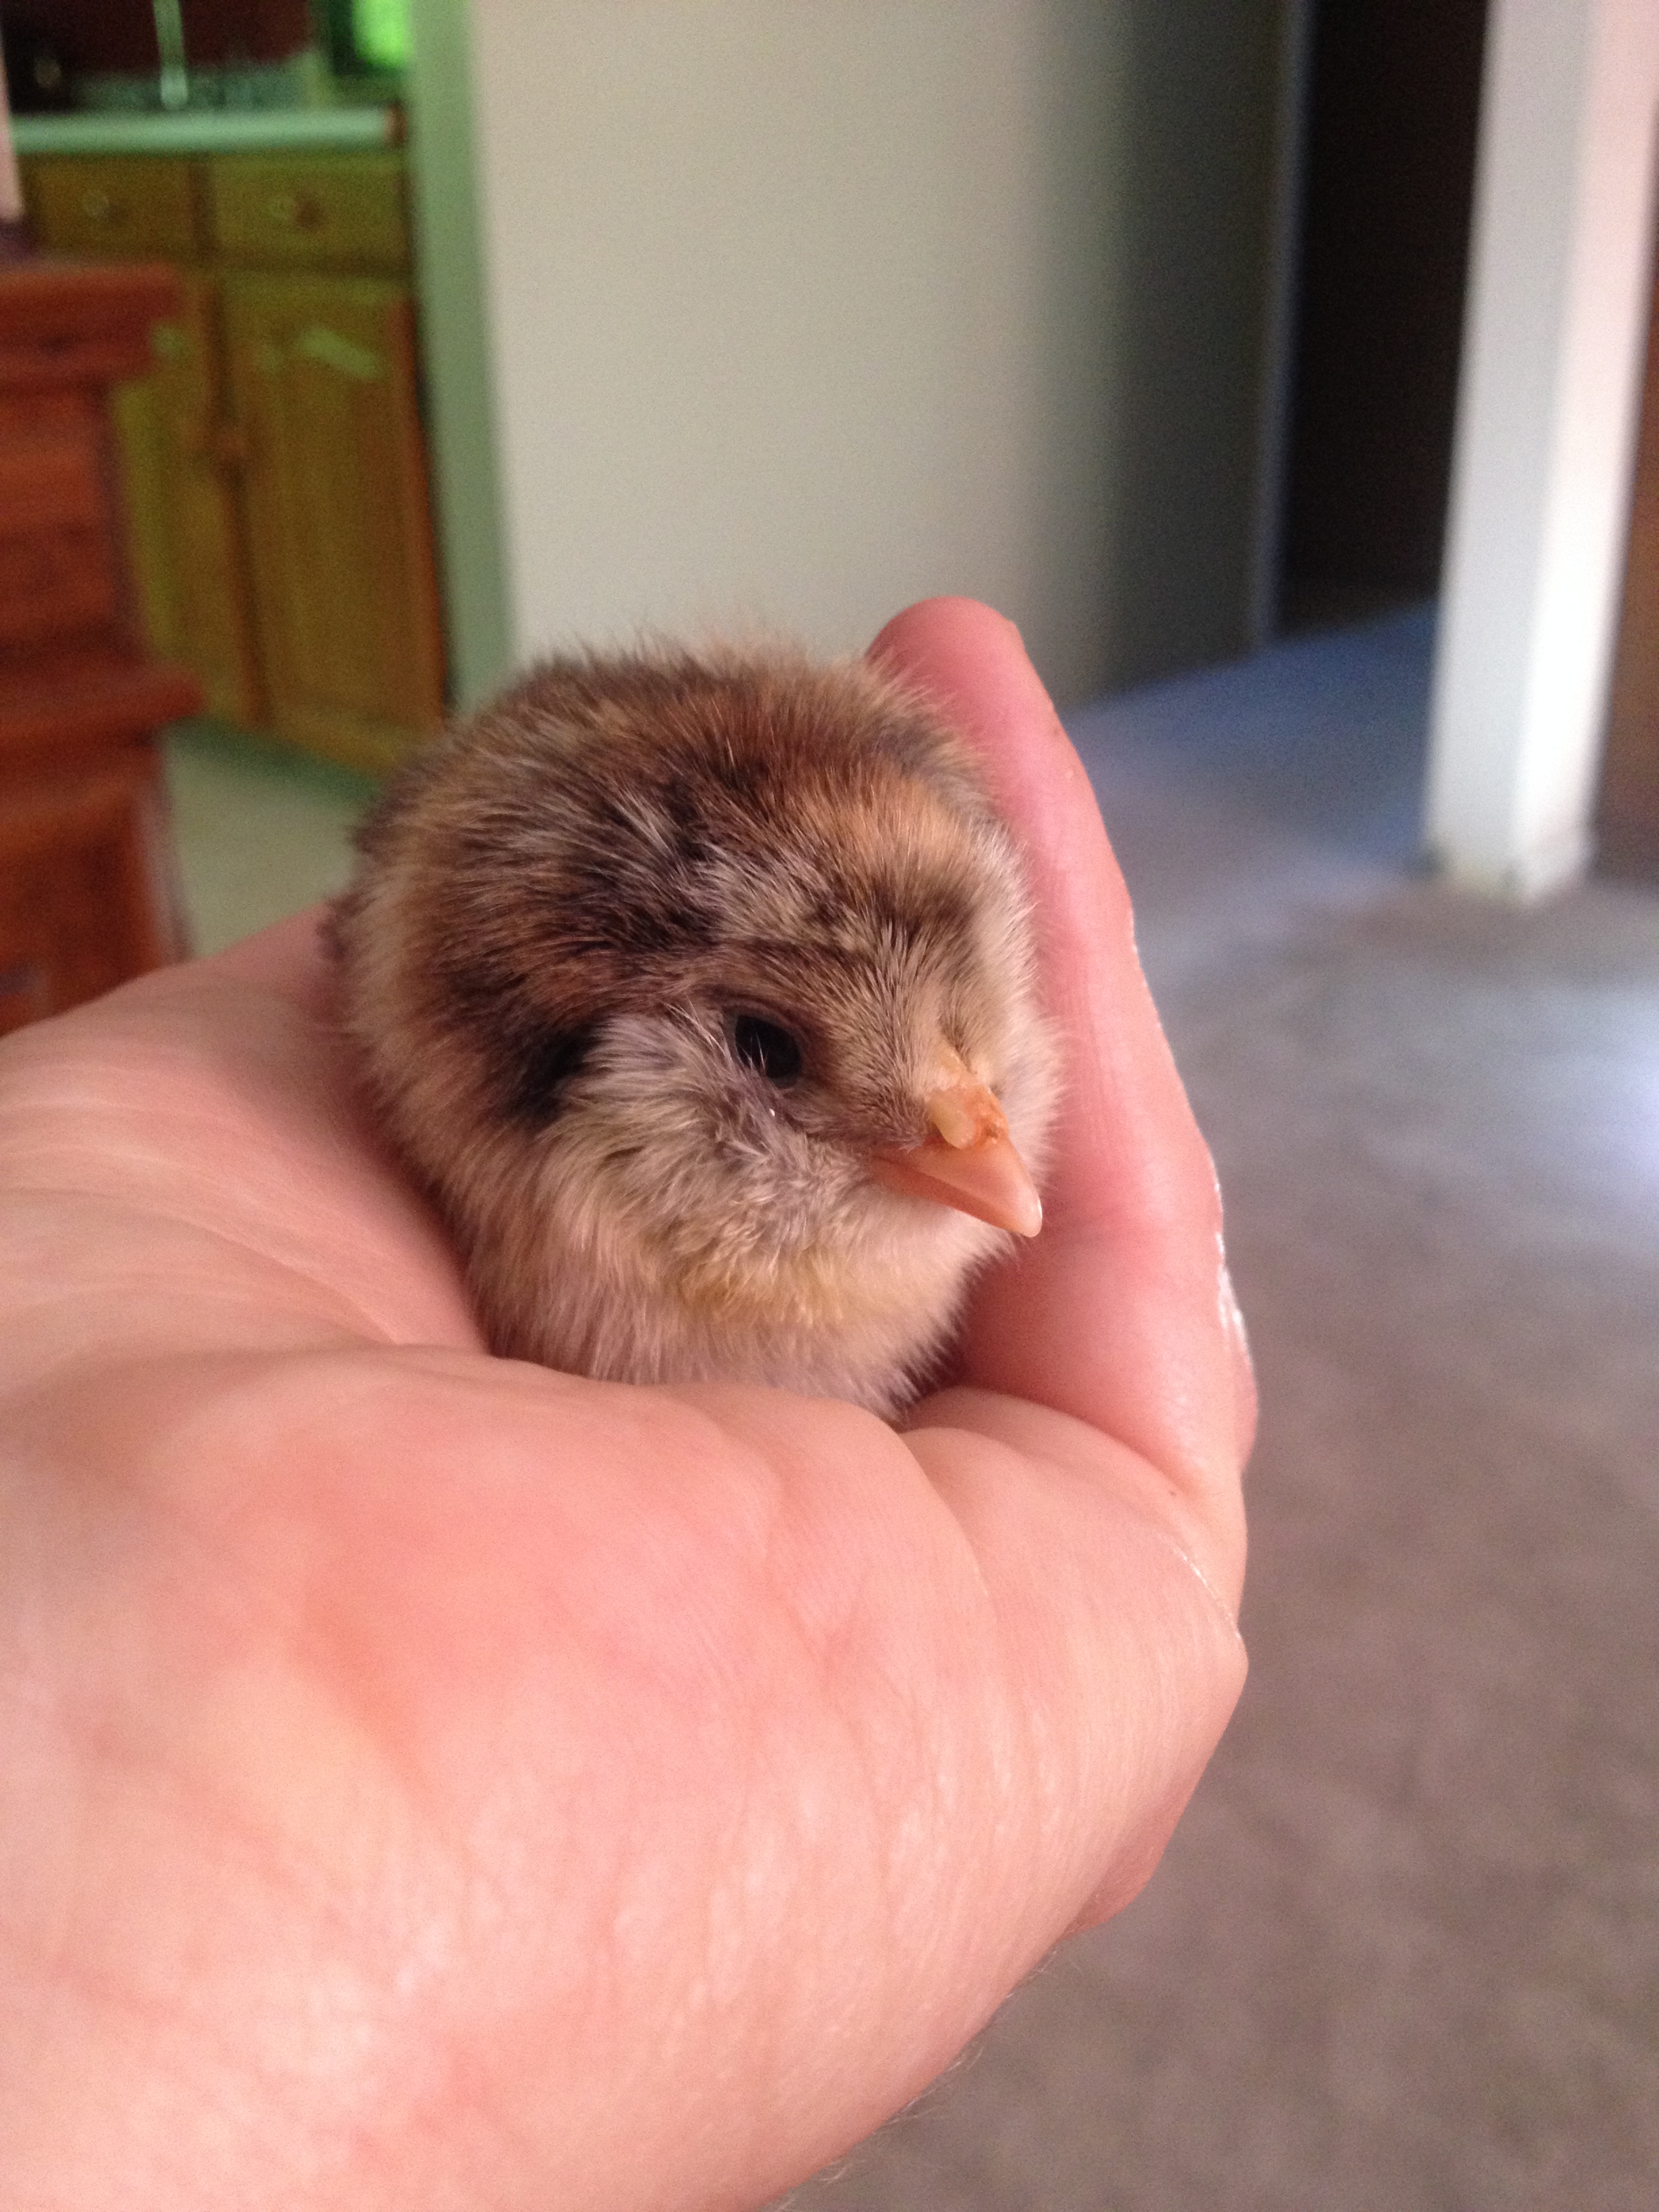 This is Handy, he didn't know how to eat or drink and I had to force feed him for three days before he learned to do so on his own.  He is now two weeks old and doing quite well, but is about a third of the size of his little flock.